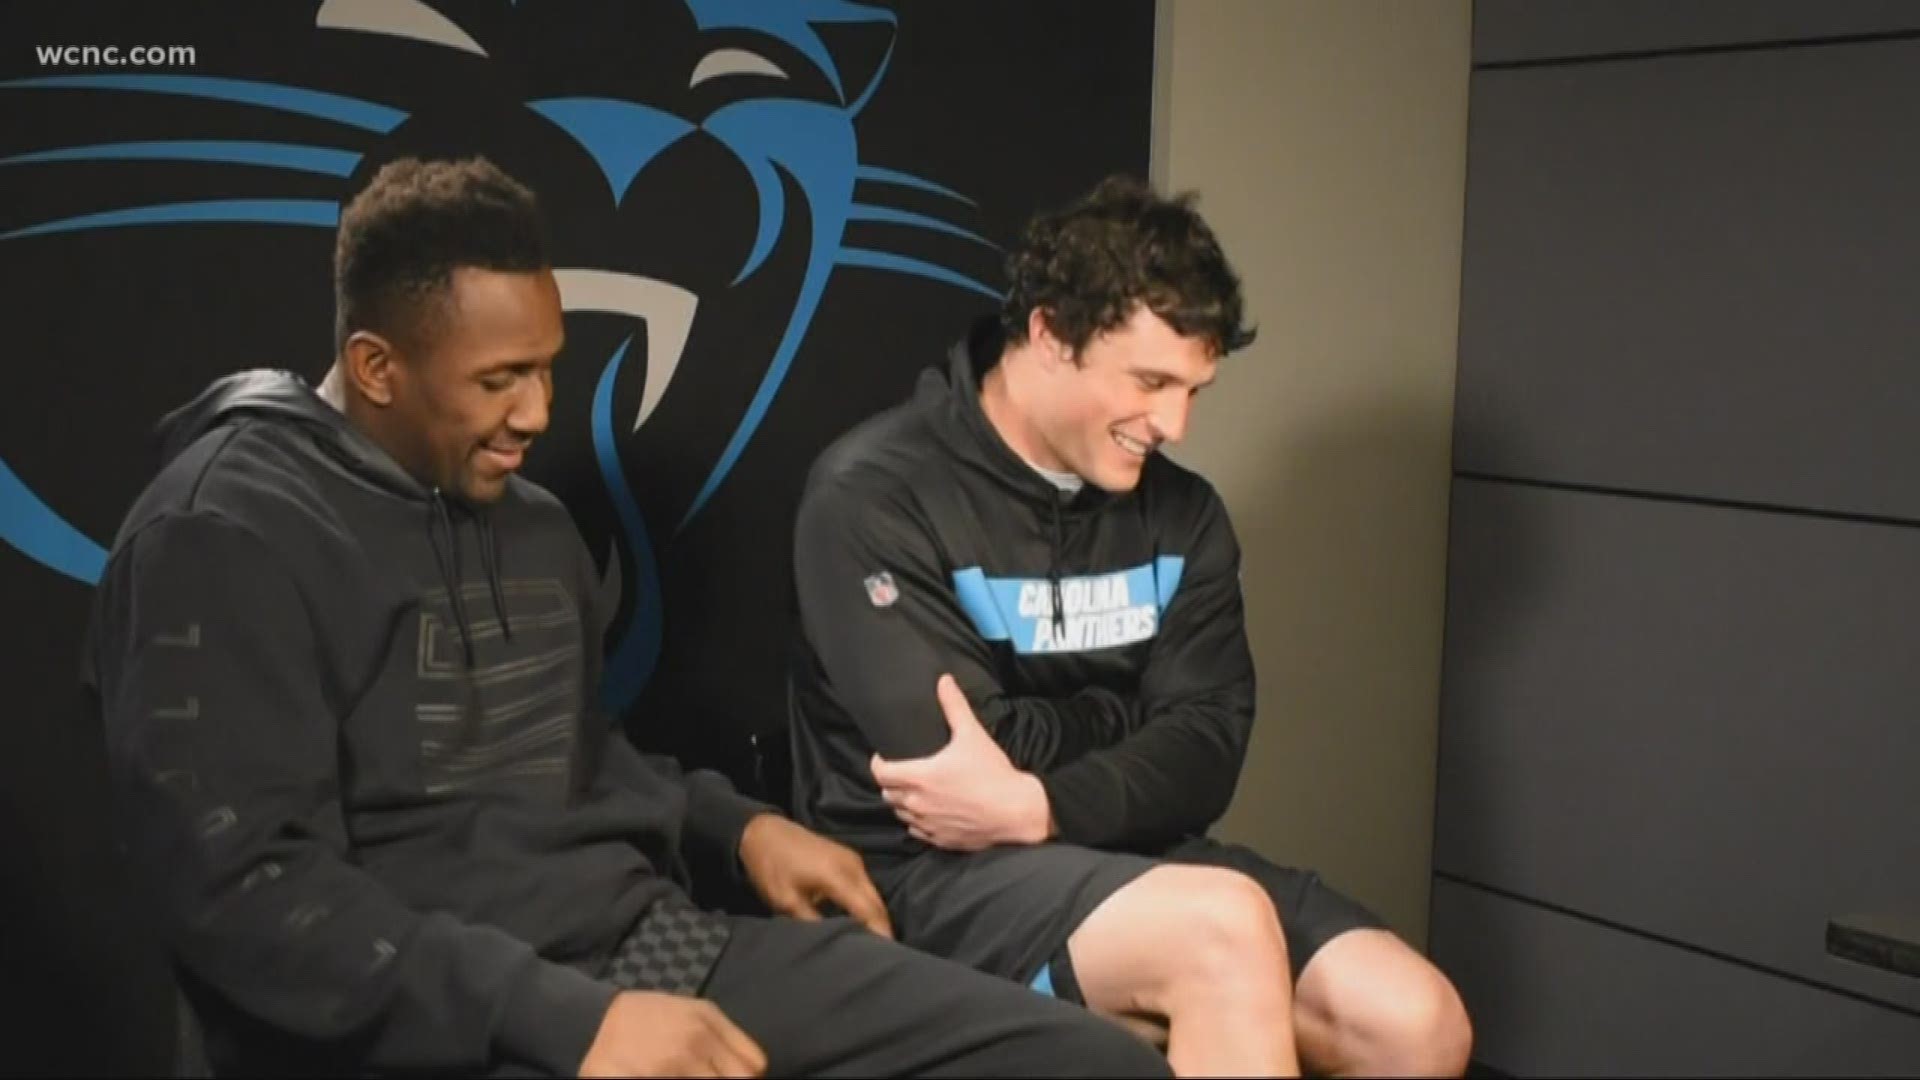 For years, they've been the most dynamic duo of linebackers in the NFL. Turns out Luke Kuechly and Thomas Davis are pretty good friends off the field, too.